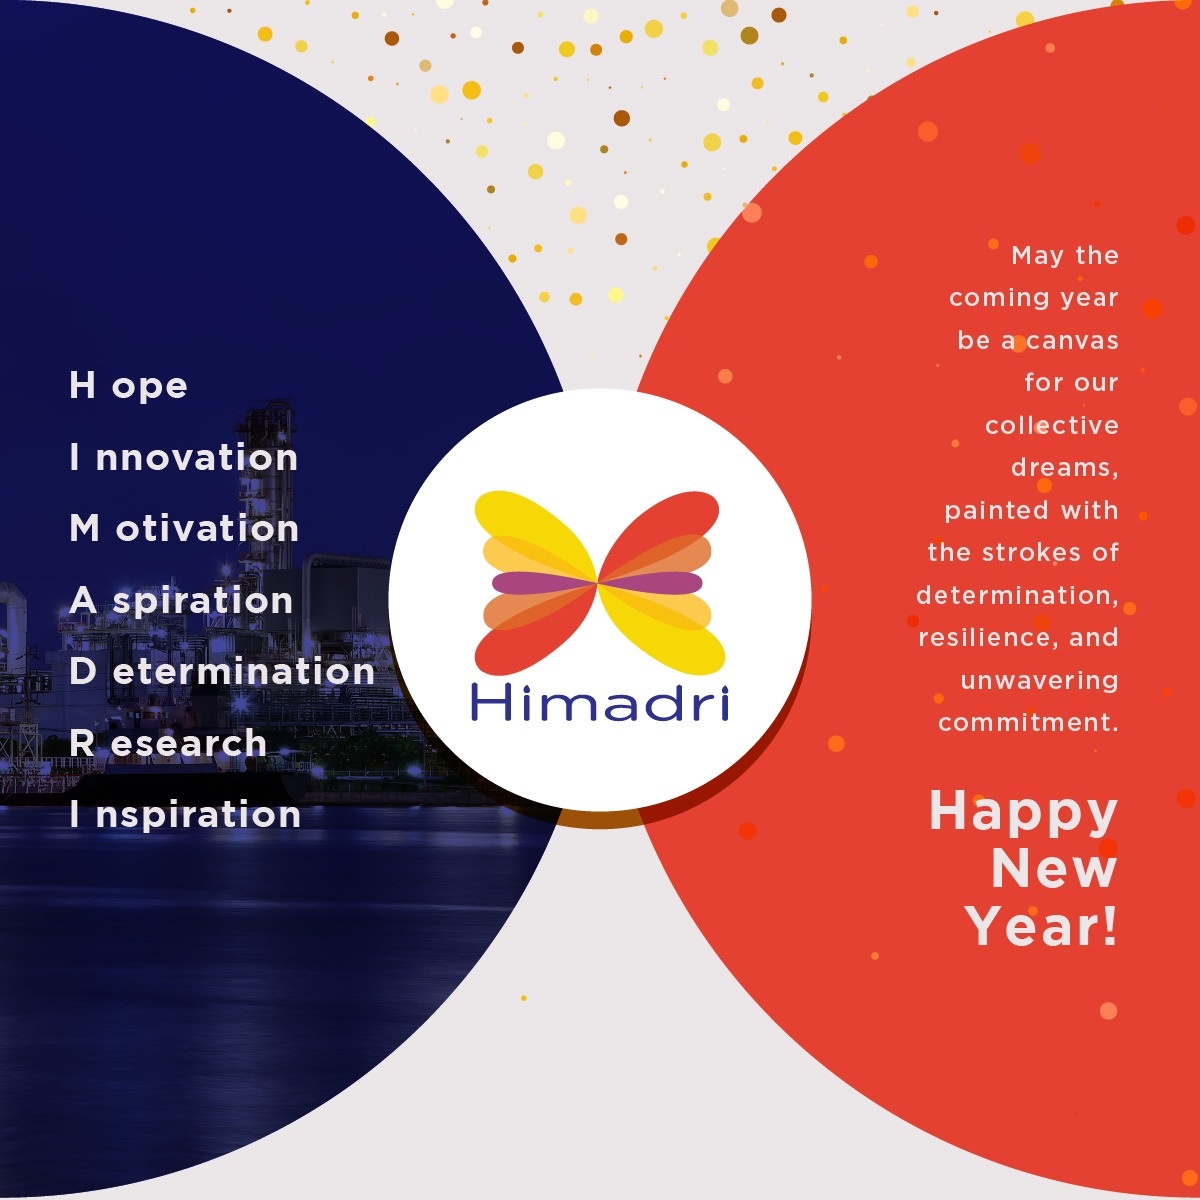 Here's to moving forward on our path of excellence and reaching new heights. Wishing you all a very Happy New Year 2024!

#HappyNewYear #NewYear2024 #Himadri #TransformationUnfolds #SpecialityChemicals #Himadrispchem